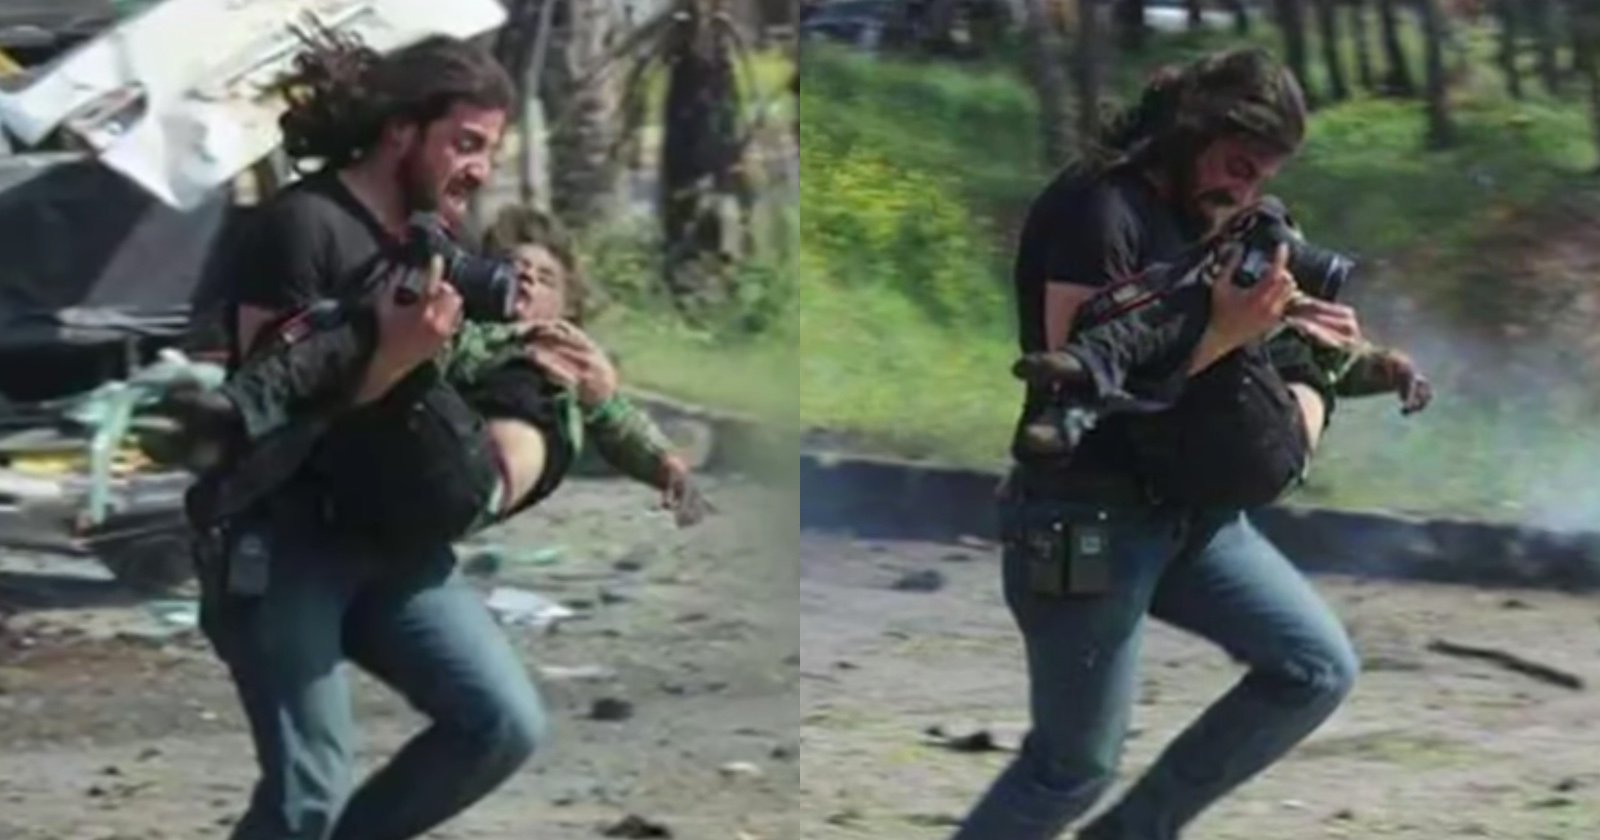 Syrian Photographer Stops Shooting to Rescue Injured Boy